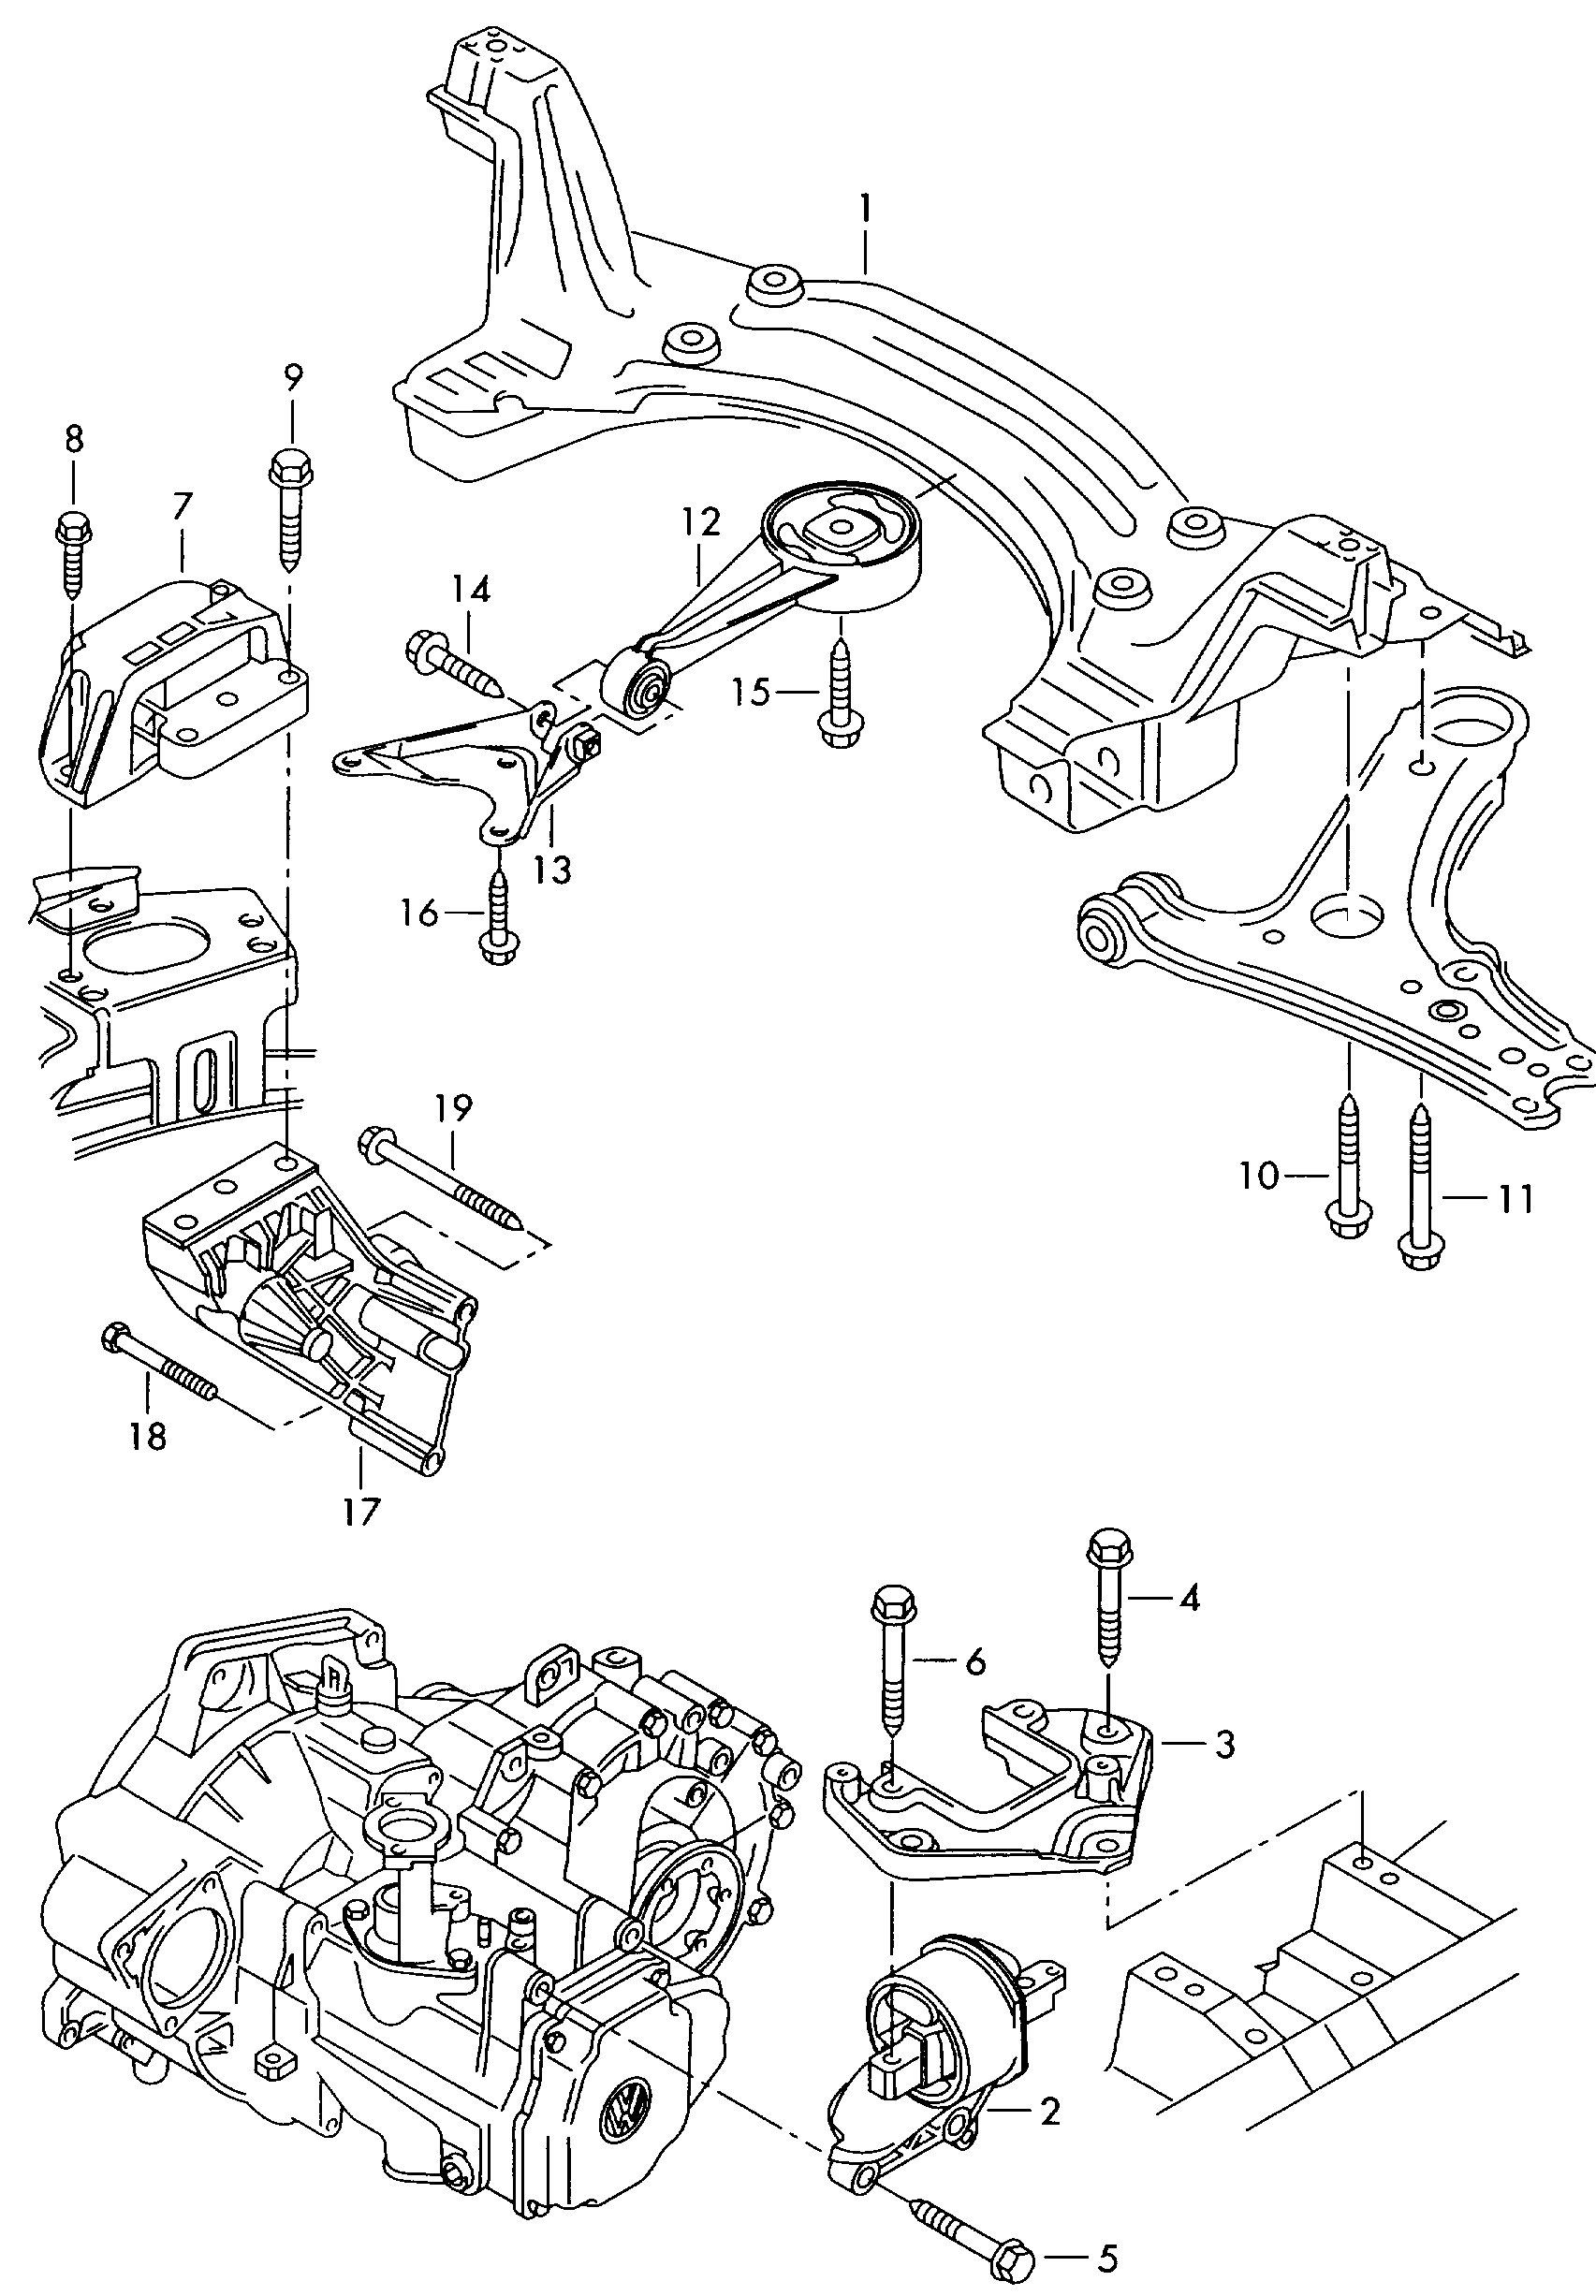 mounting parts for engine and<br>transmission 1.4ltr. - Lupo / Lupo 3L TDI - lu